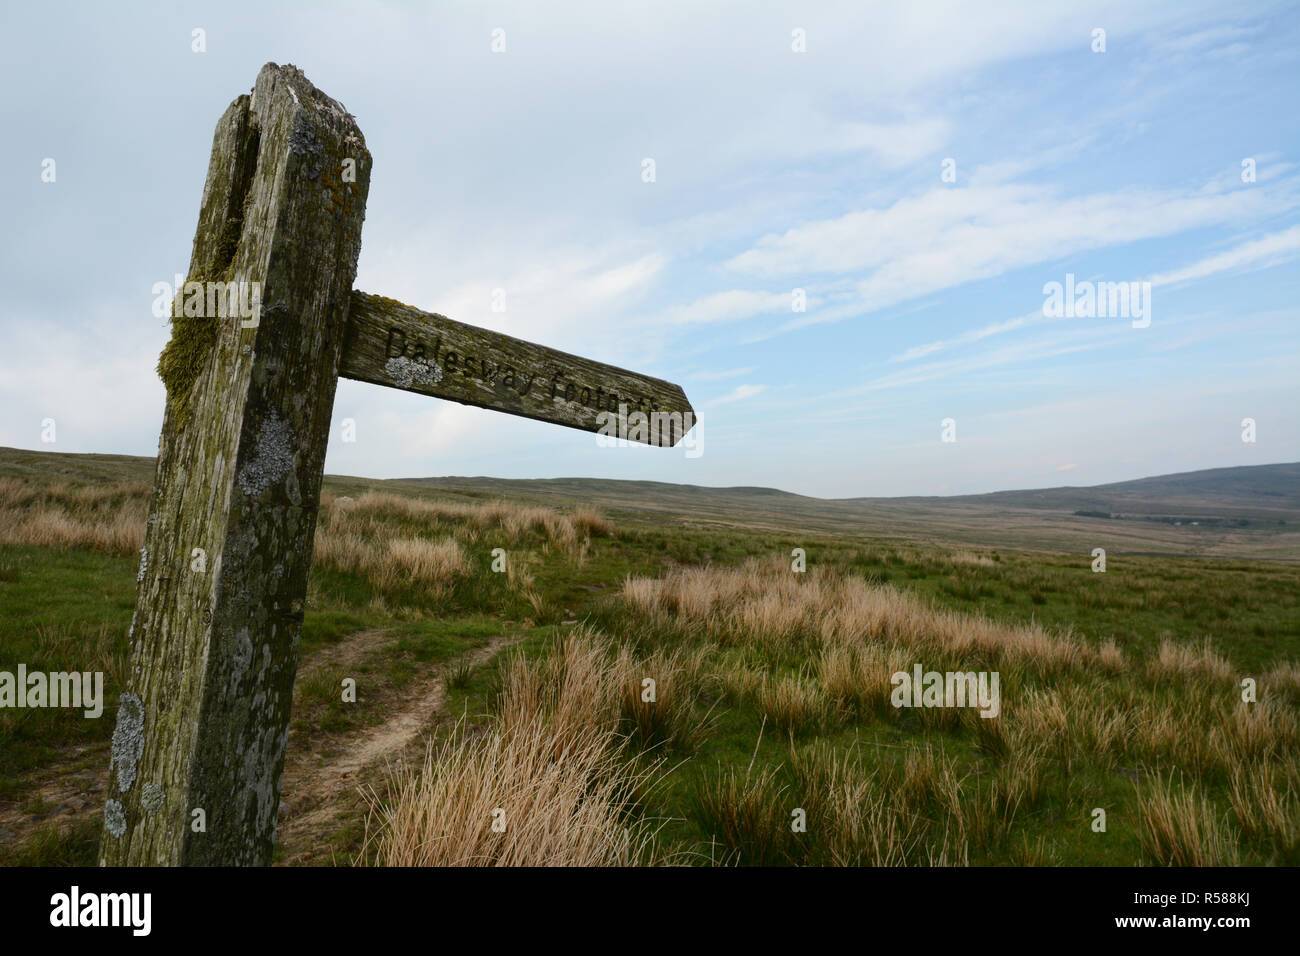 A sign reading 'Dales Way Footpath' indicating the direction of The Dales Way hiking trail in Yorkshire, England, United Kingdom Stock Photo